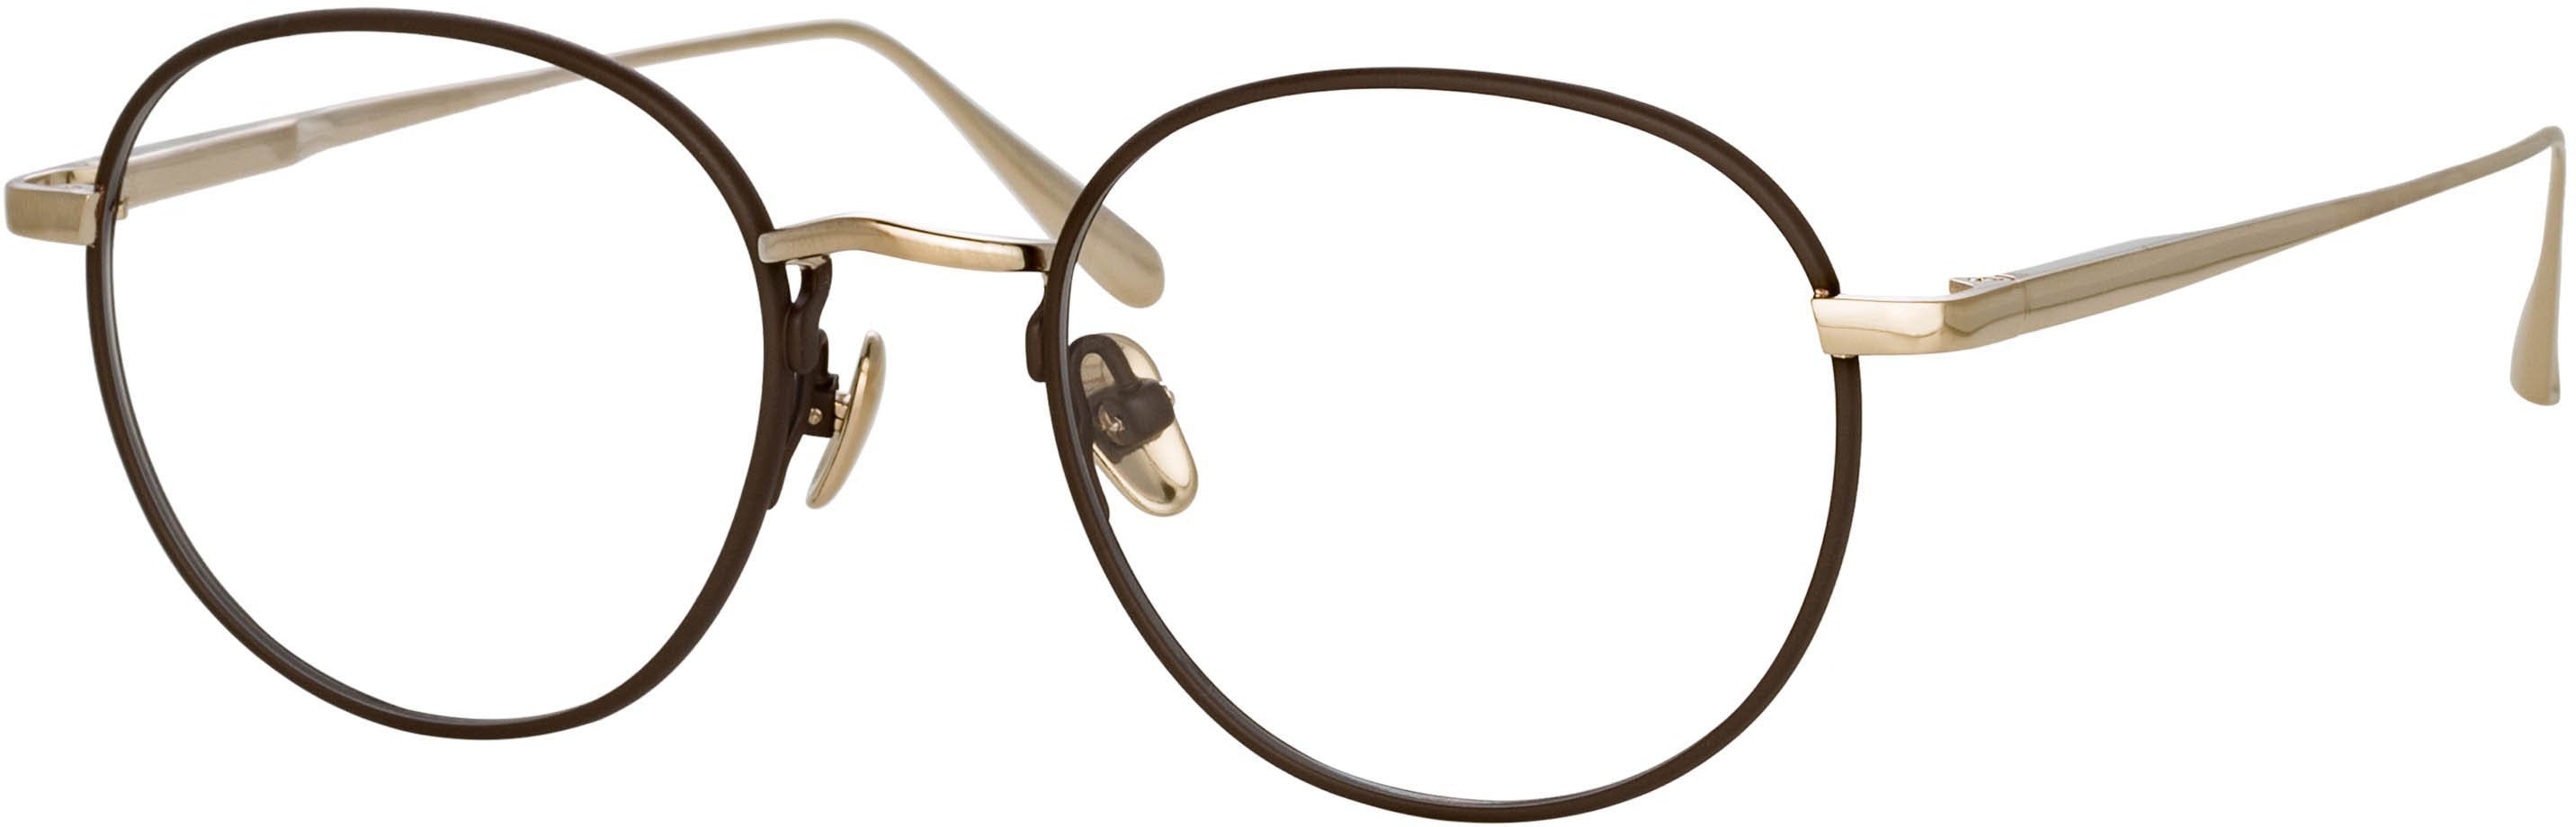 Color_LFL1230C4OPT - Anton Oval Optical Frame in Light Gold and Brown